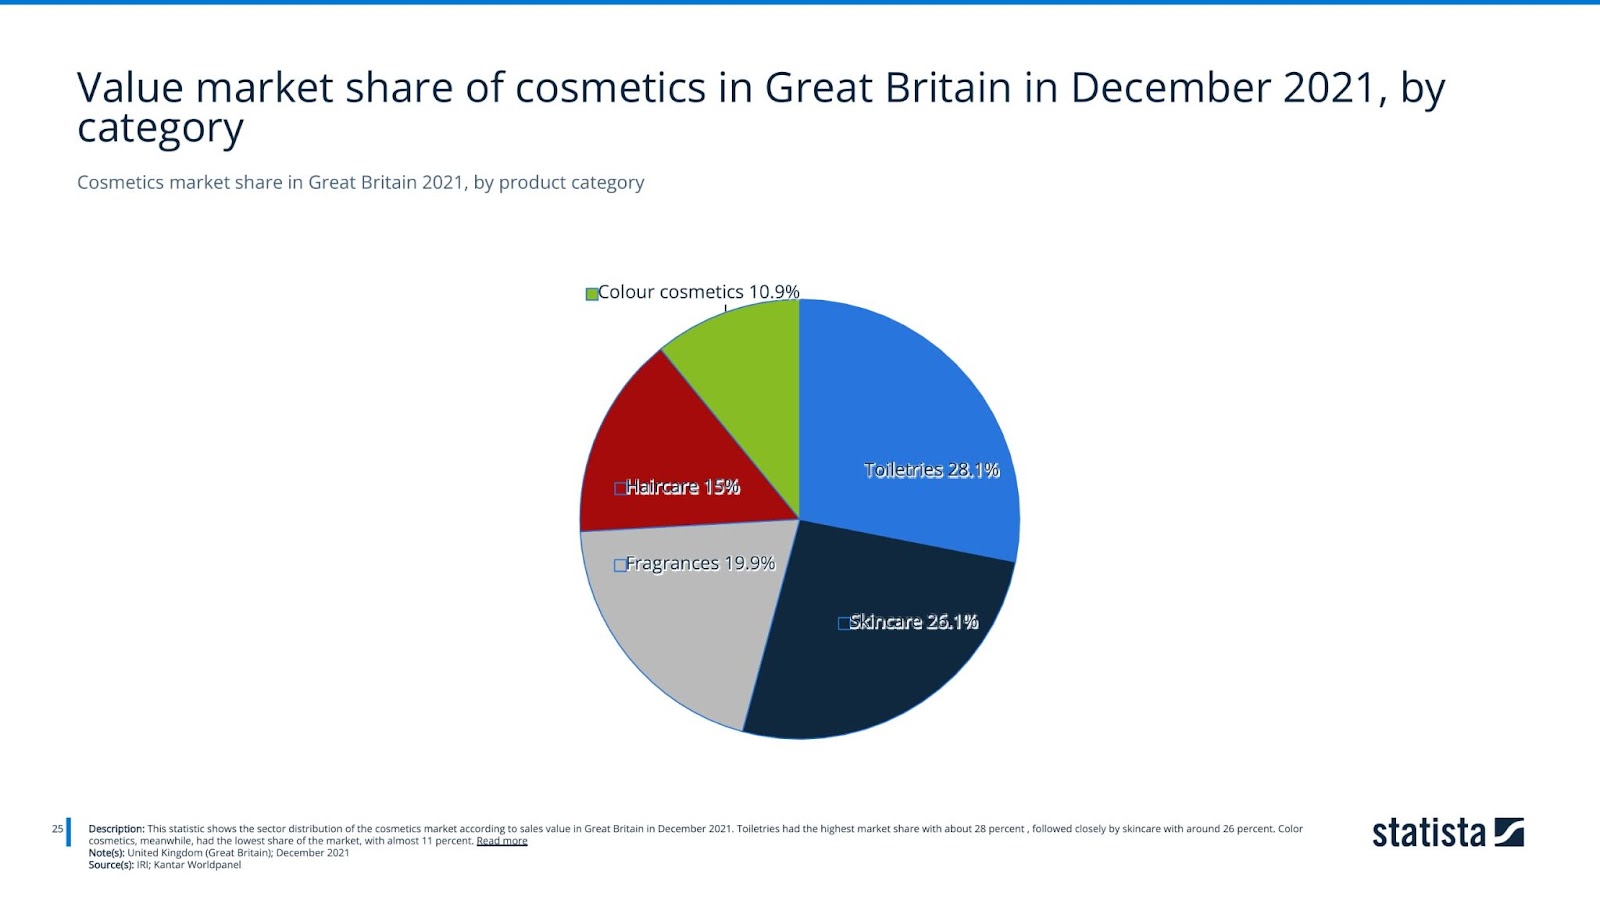 Cosmetics market share in Great Britain 2021, by product category